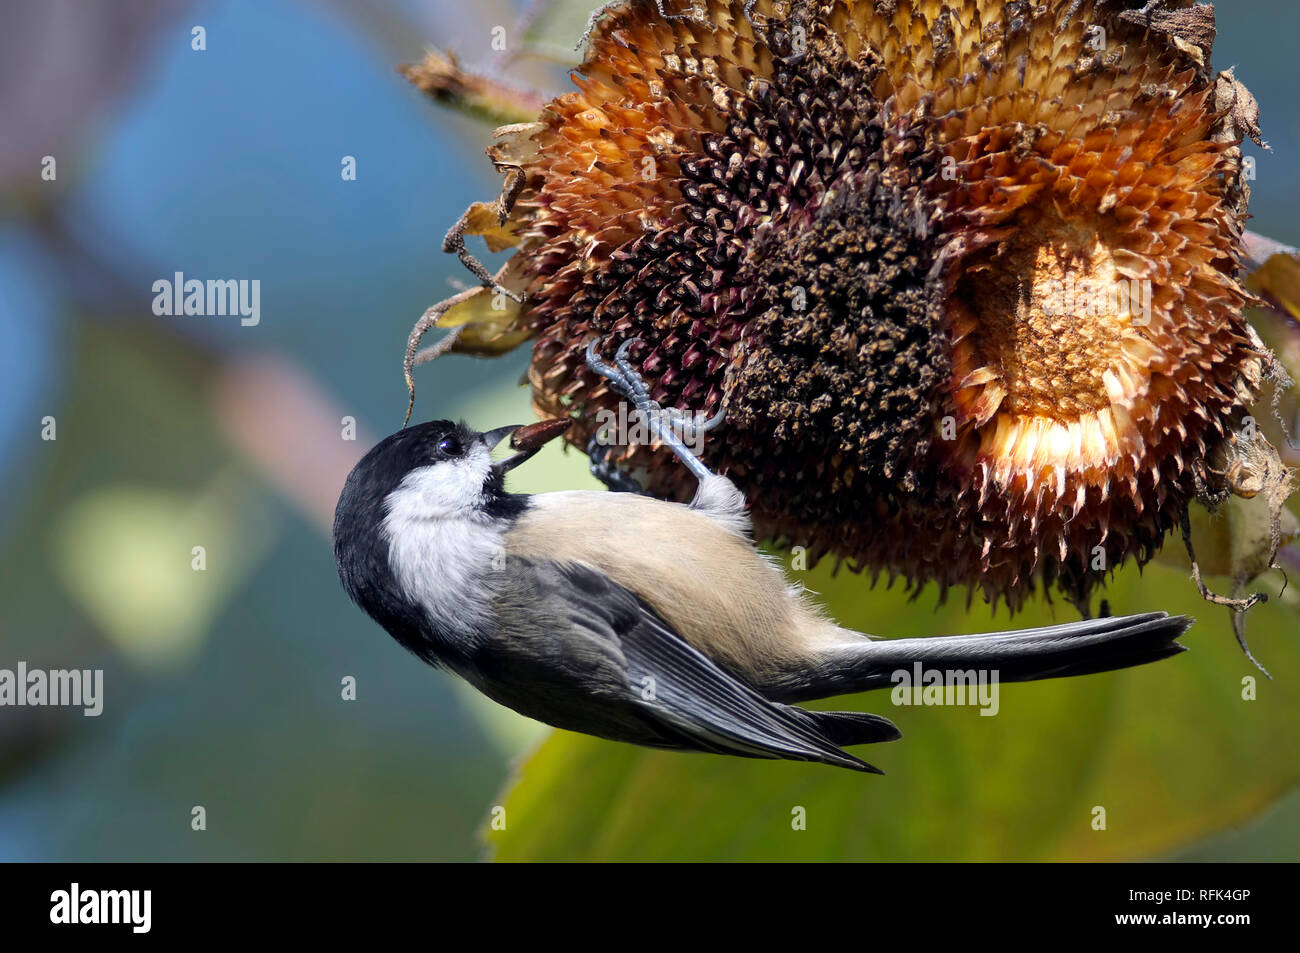 A Black-capped Chickadee (Poecile atricapillus) retrieving a sunflower seed from the head of a sunflower. Stock Photo